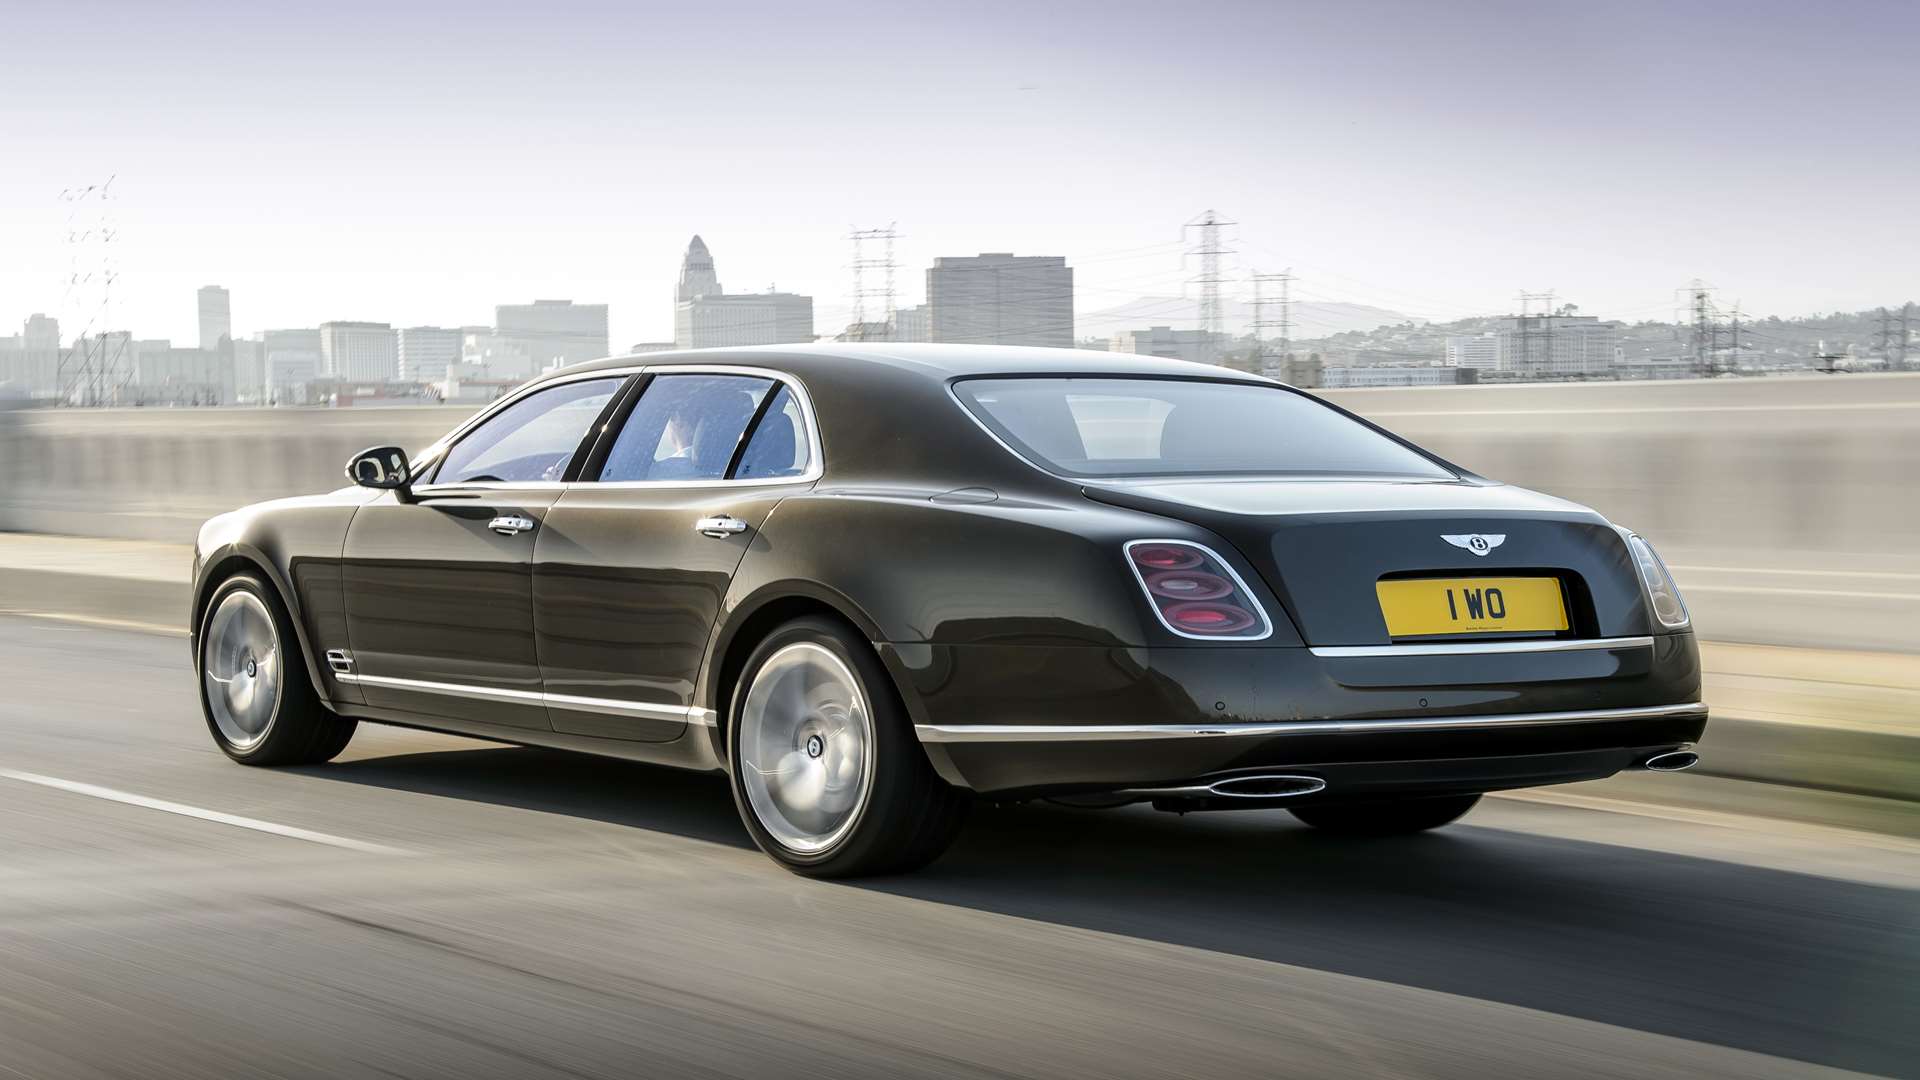 Elegant and refined, the Mulsanne Speed is a remarkable piece of engineering